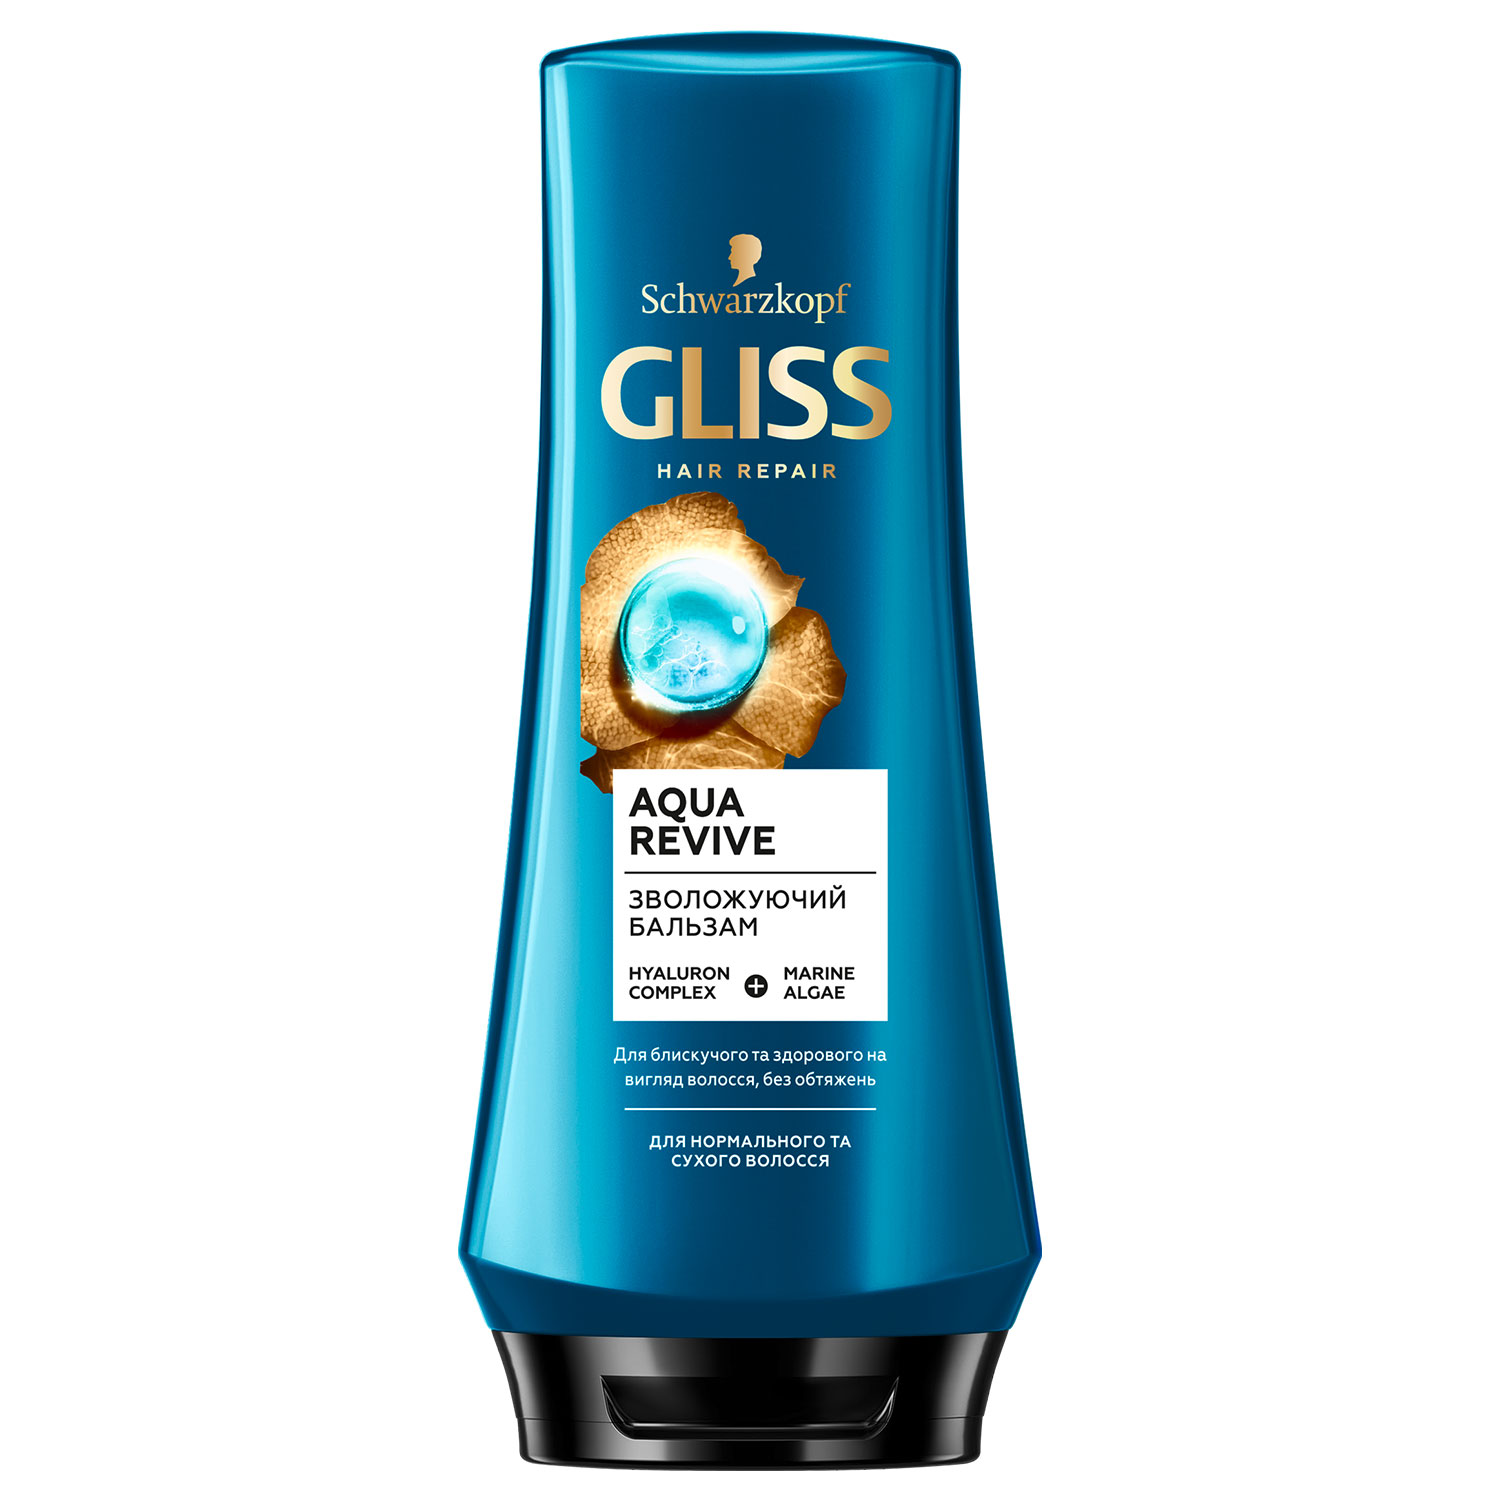 GLISS Moisturizing Conditioner Aqua Revive 200 ml with Hyaluron and Marine Algae, Moisturising Conditioner for Dry Hair to Normal Hair